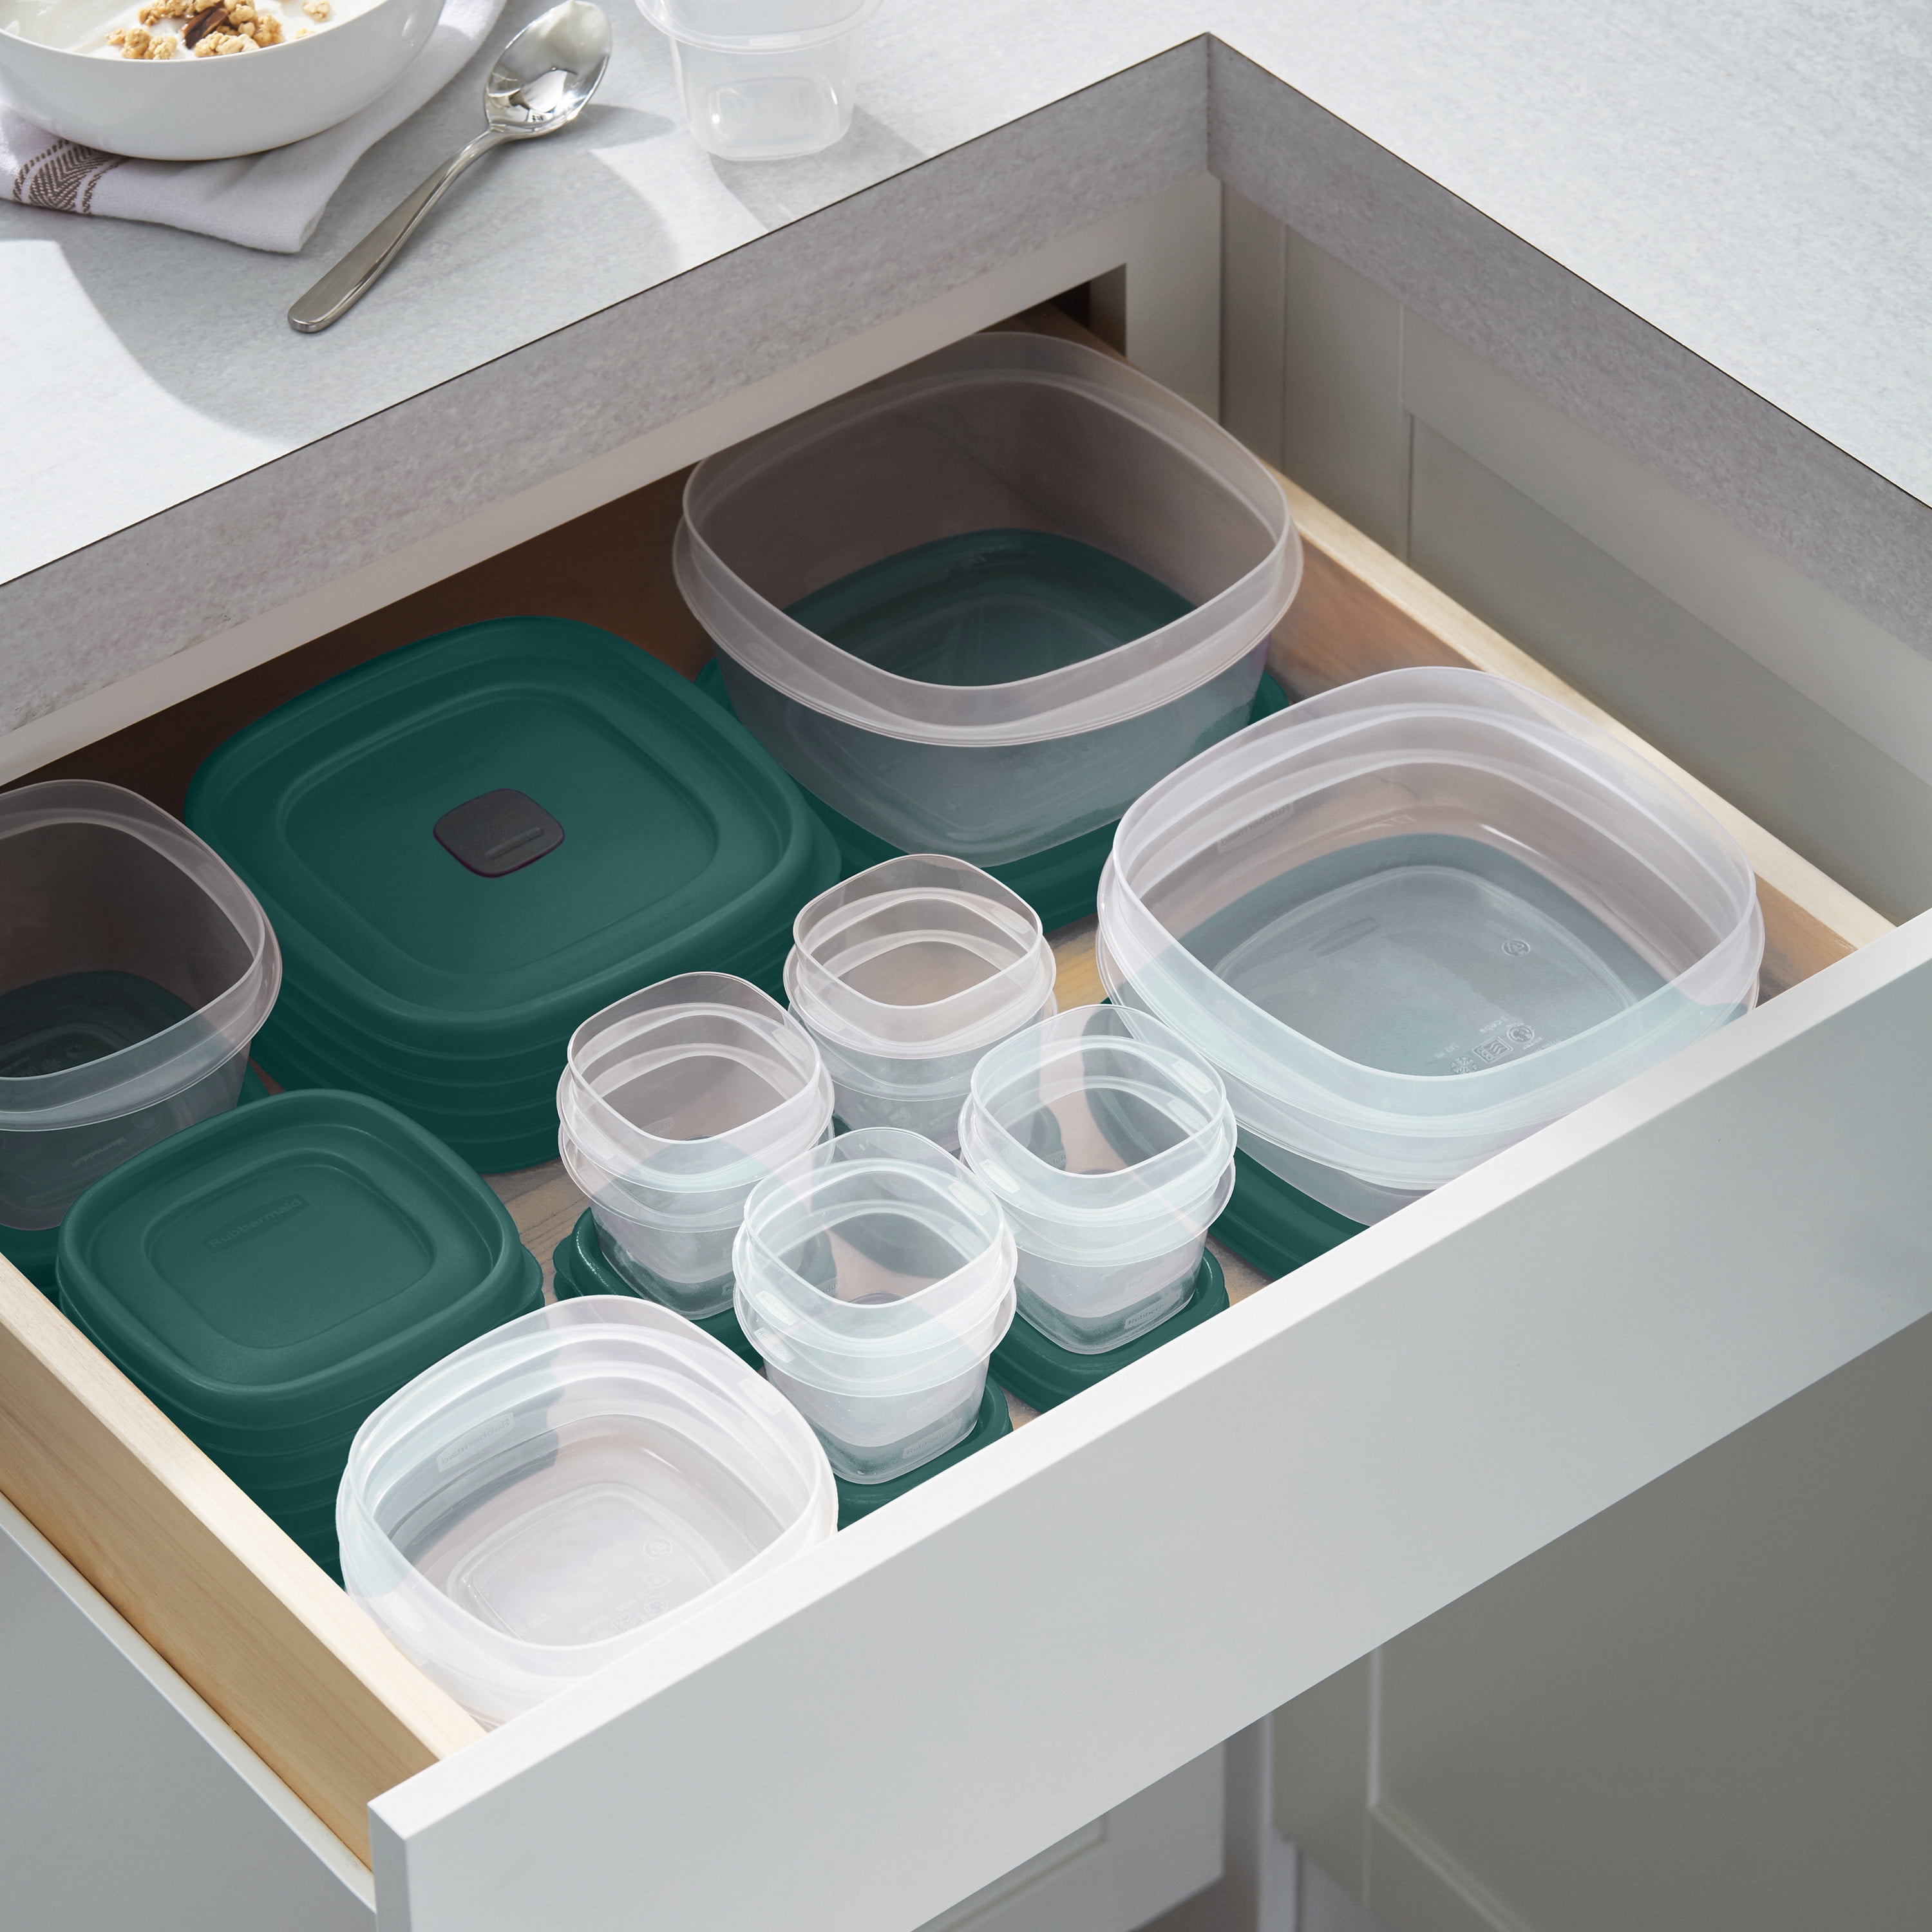 $24.99! beat that Rubbermaid! 60 piece set includes microwave safe  containers and measuring spoons. Yes I'm a little bitter because I…